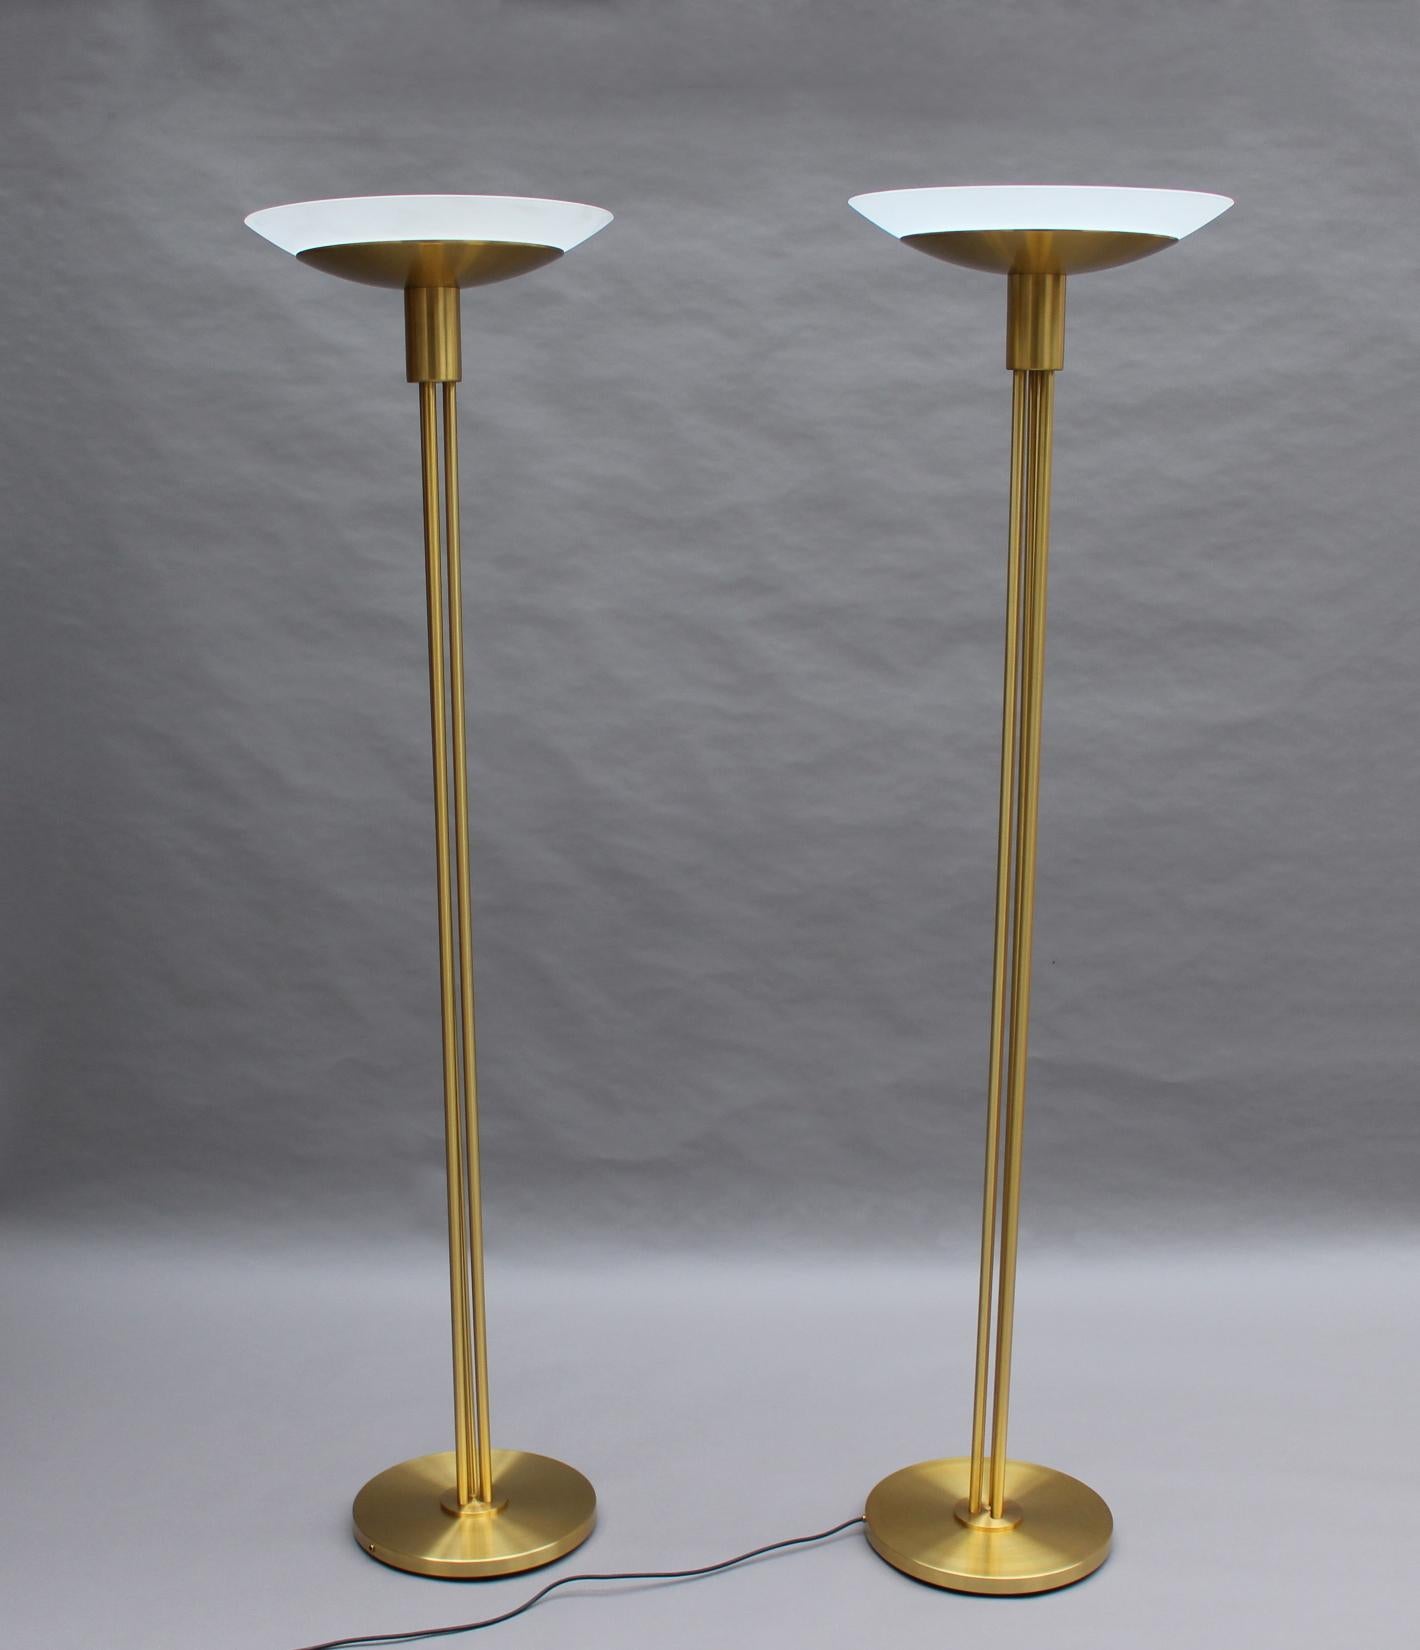 2 Fine French Mid-Century Bronze and Glass Floor Lamps by Perzel For Sale 4